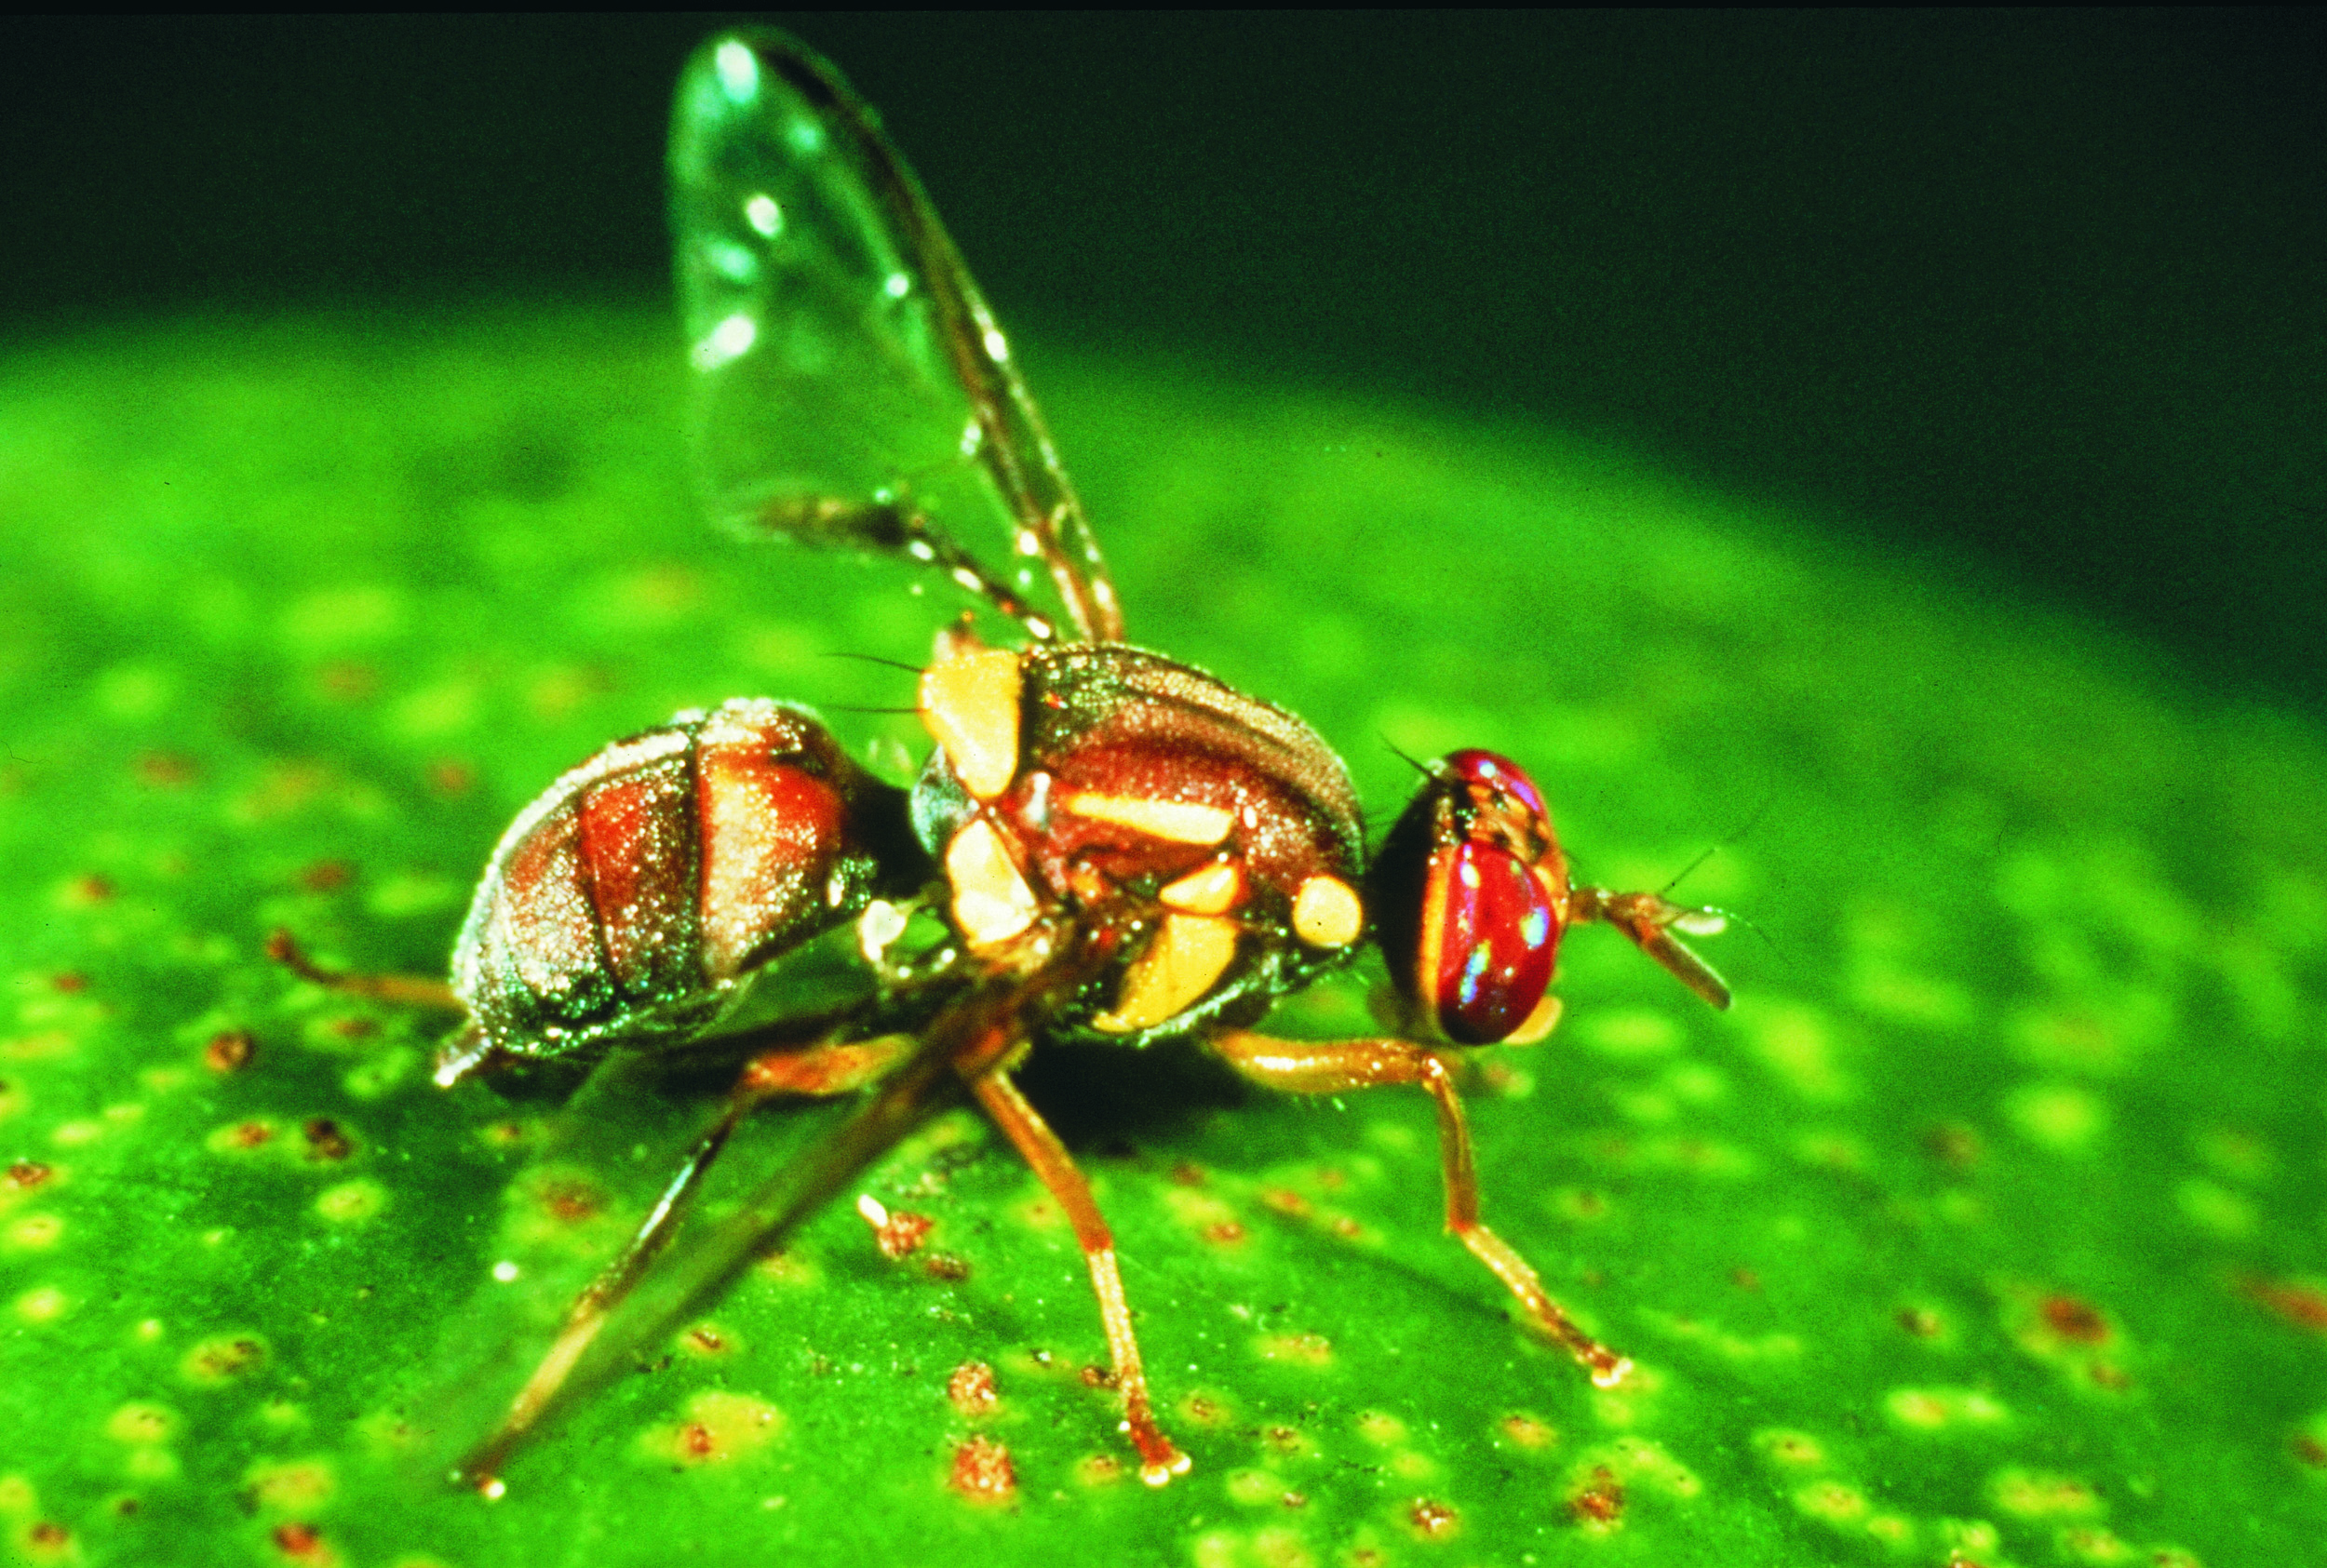 Biosecurity alerts: Queensland fruit fly updates | Agriculture and Food